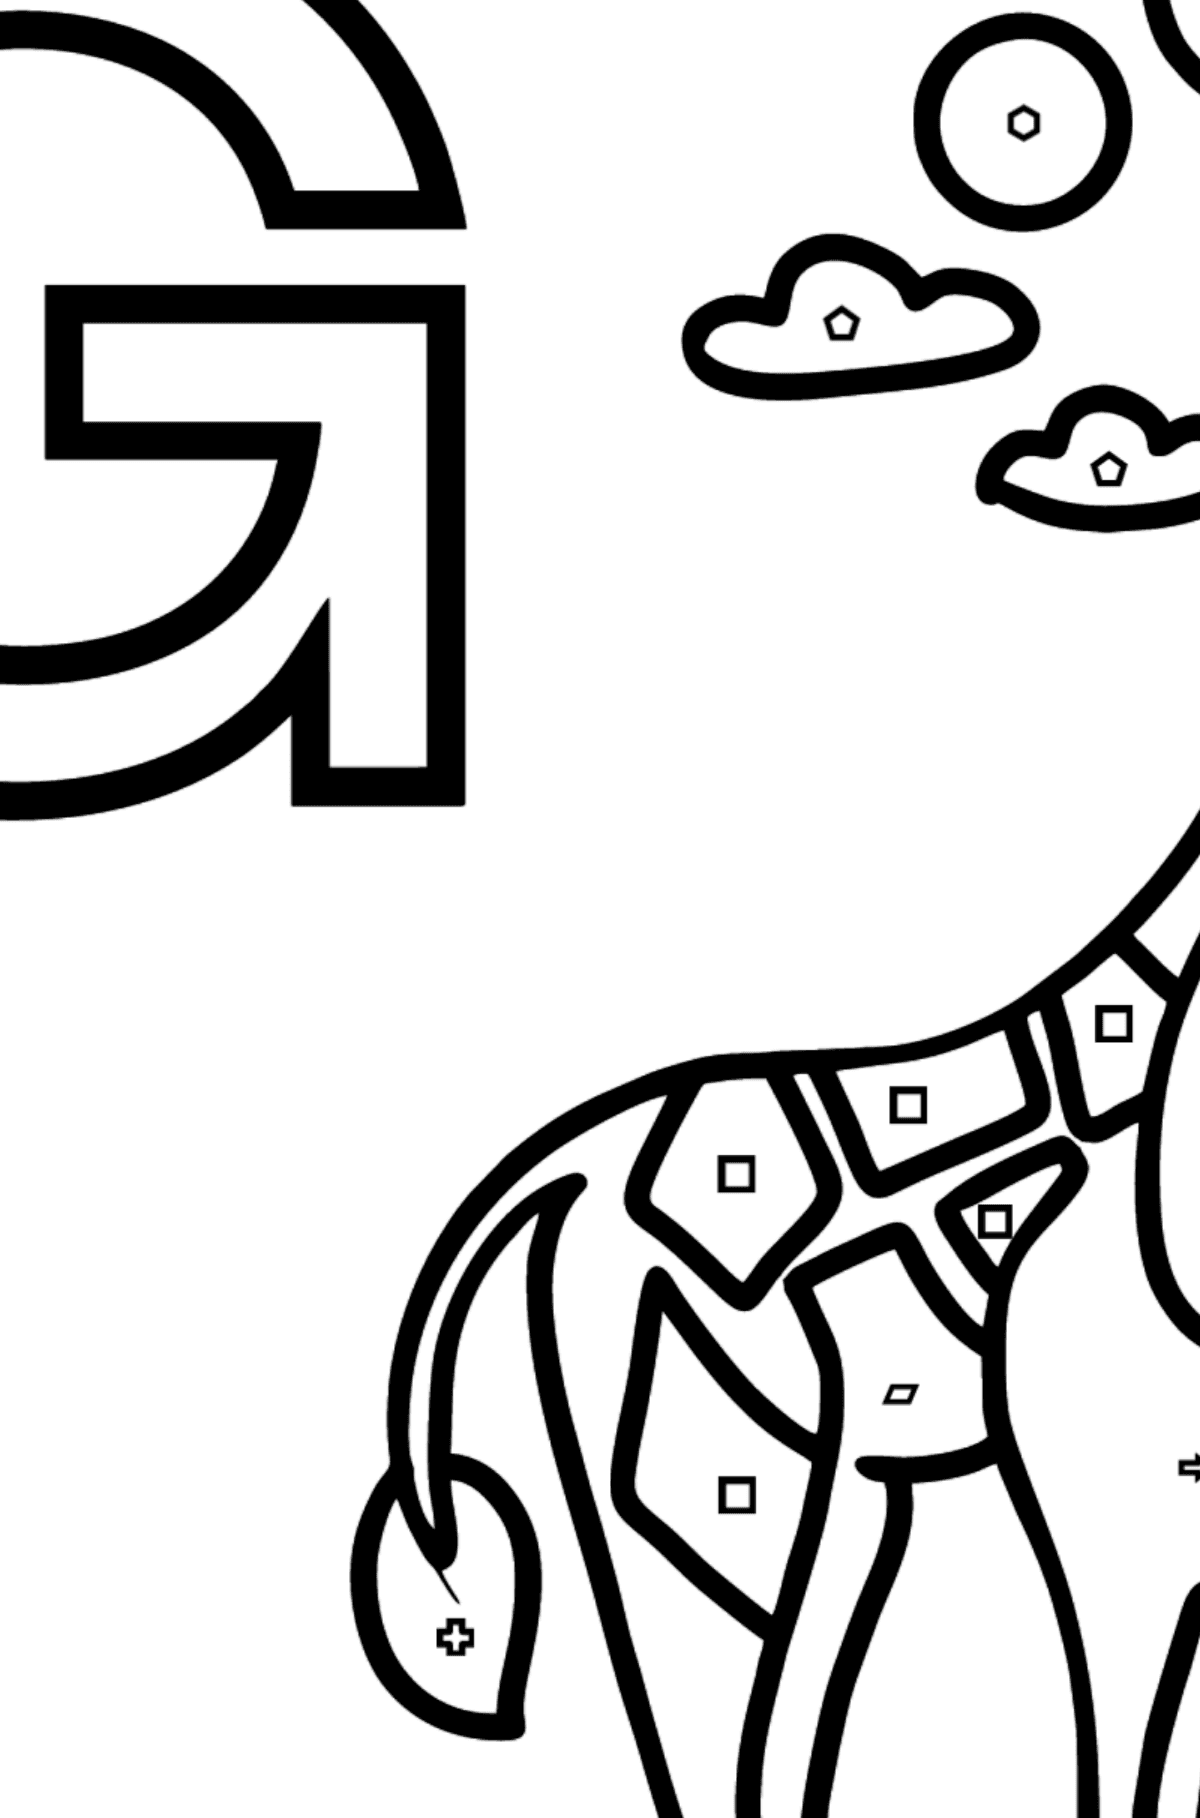 Portuguese Letter G coloring pages - GIRAFA - Coloring by Geometric Shapes for Kids